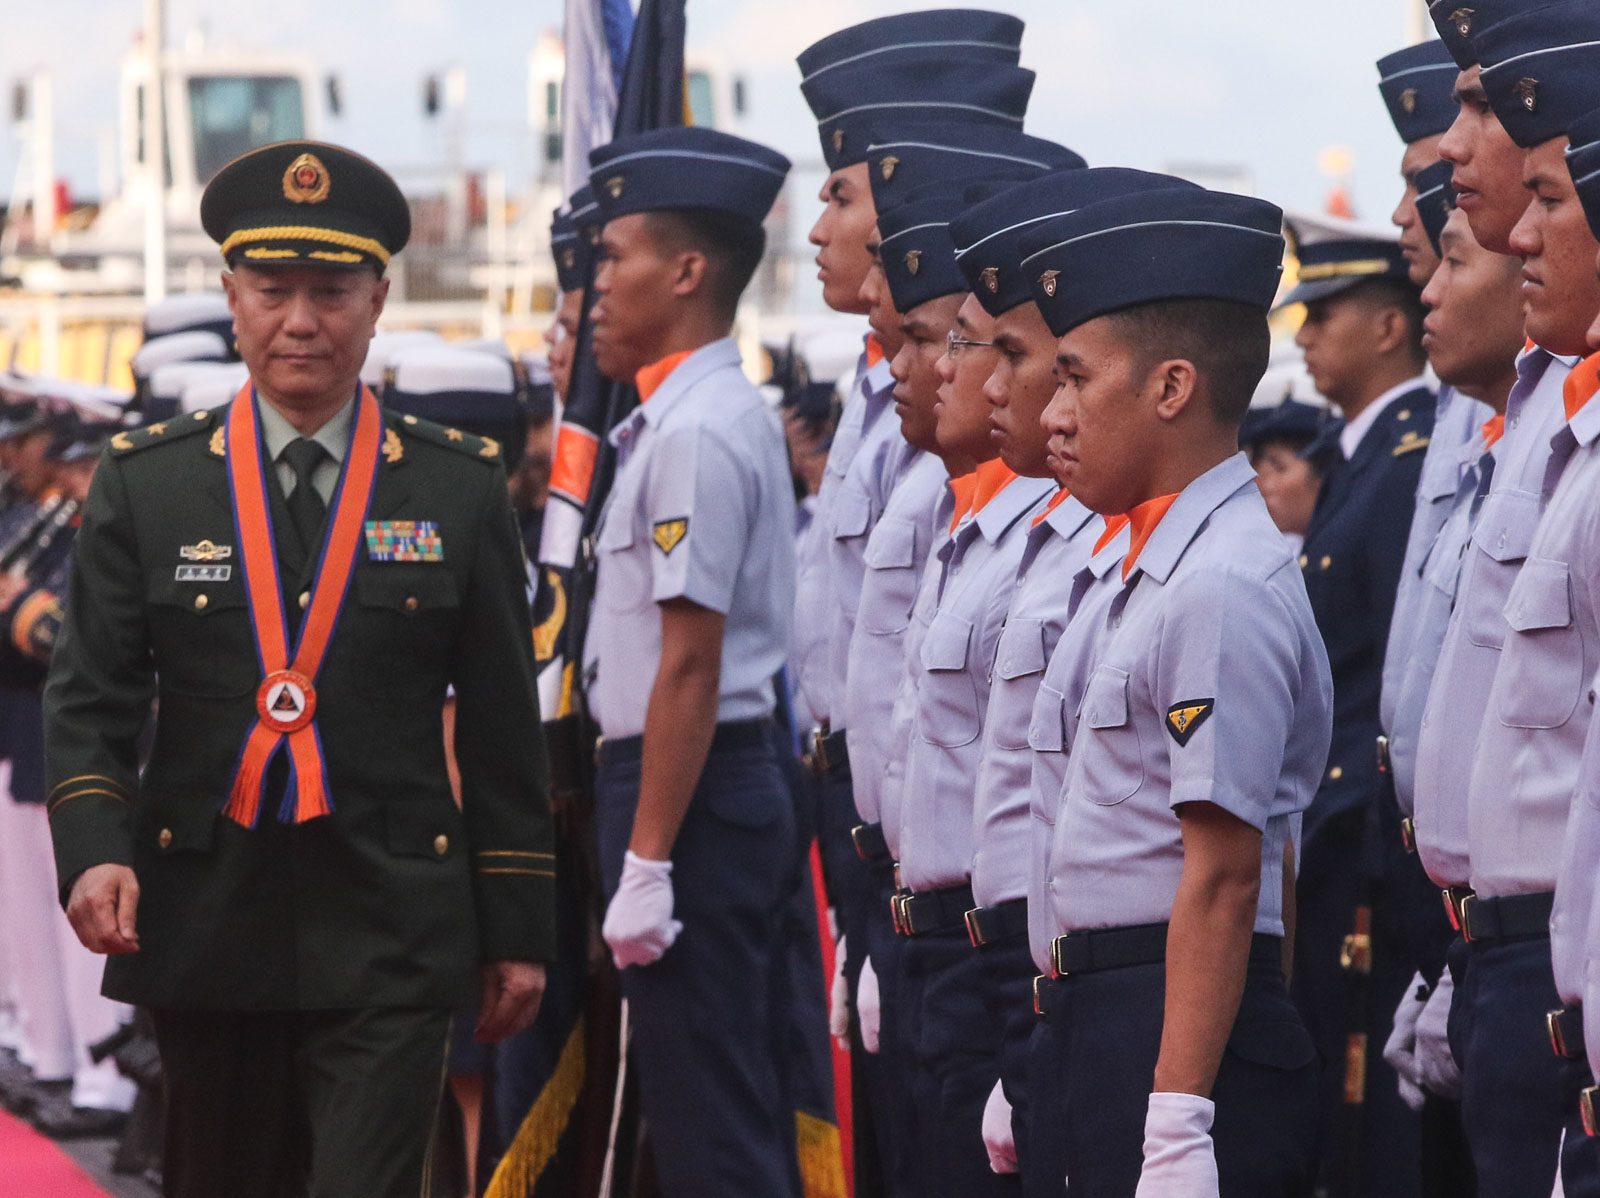 WELCOMED. China Coast Guard Major General Wang Zhongcai during the arrival honors at Philippine Coast Guard Headquarters in Manila on January 14, 2020. Photo by KD Madrilejos/Rappler 